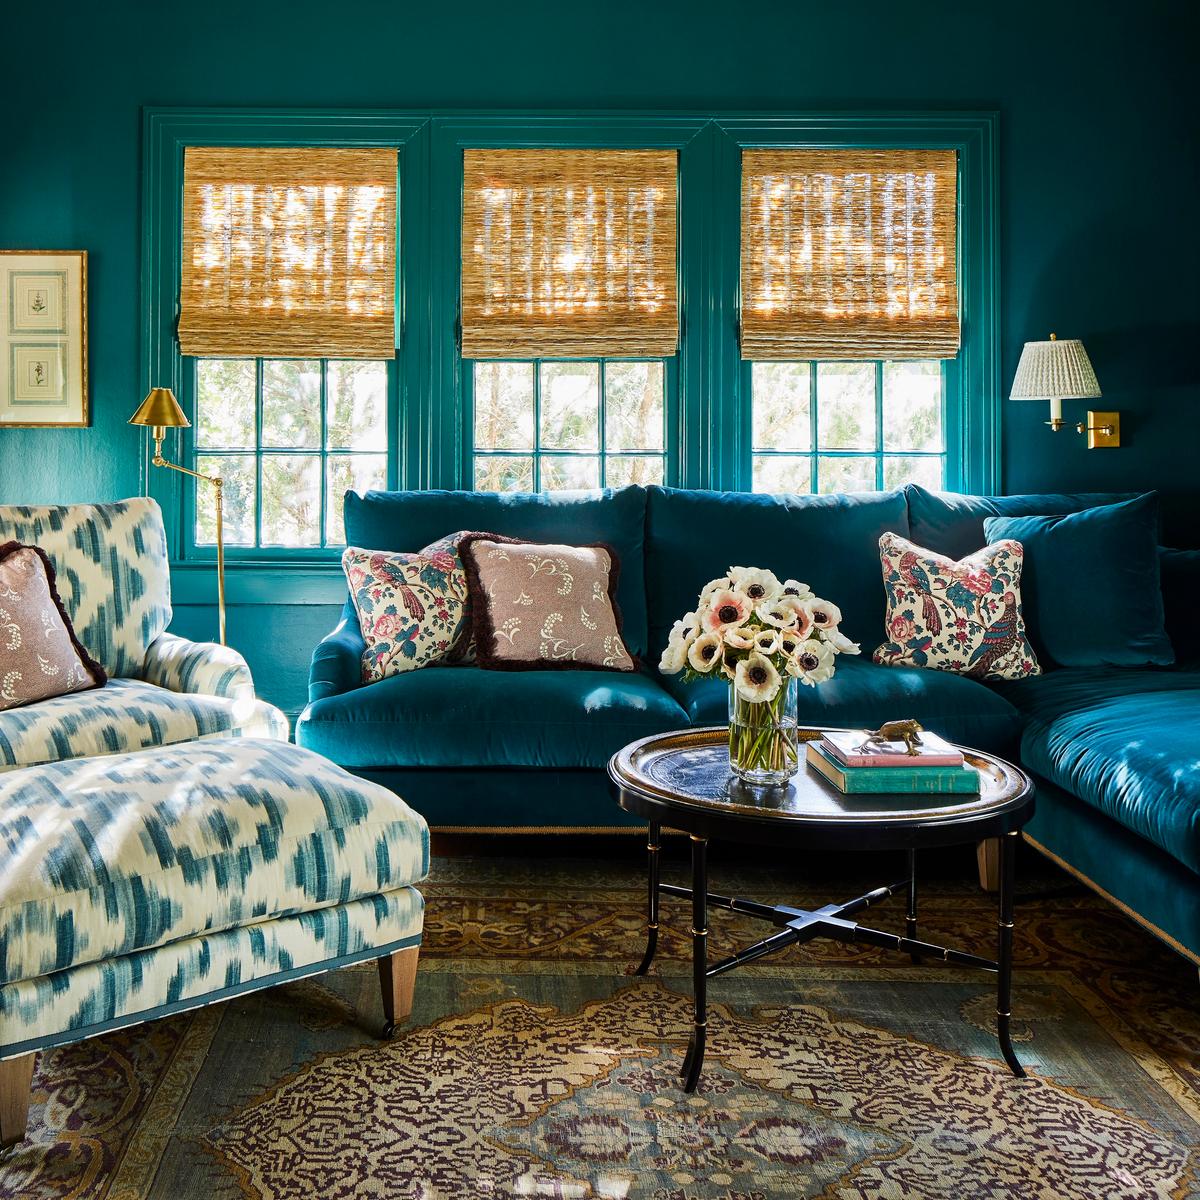 Where does an entertaining maven go to get away from it all? Her private den, painted deep teal at her request, with a matching velvet sectional and all the trimmings. (Laurey Glenn)